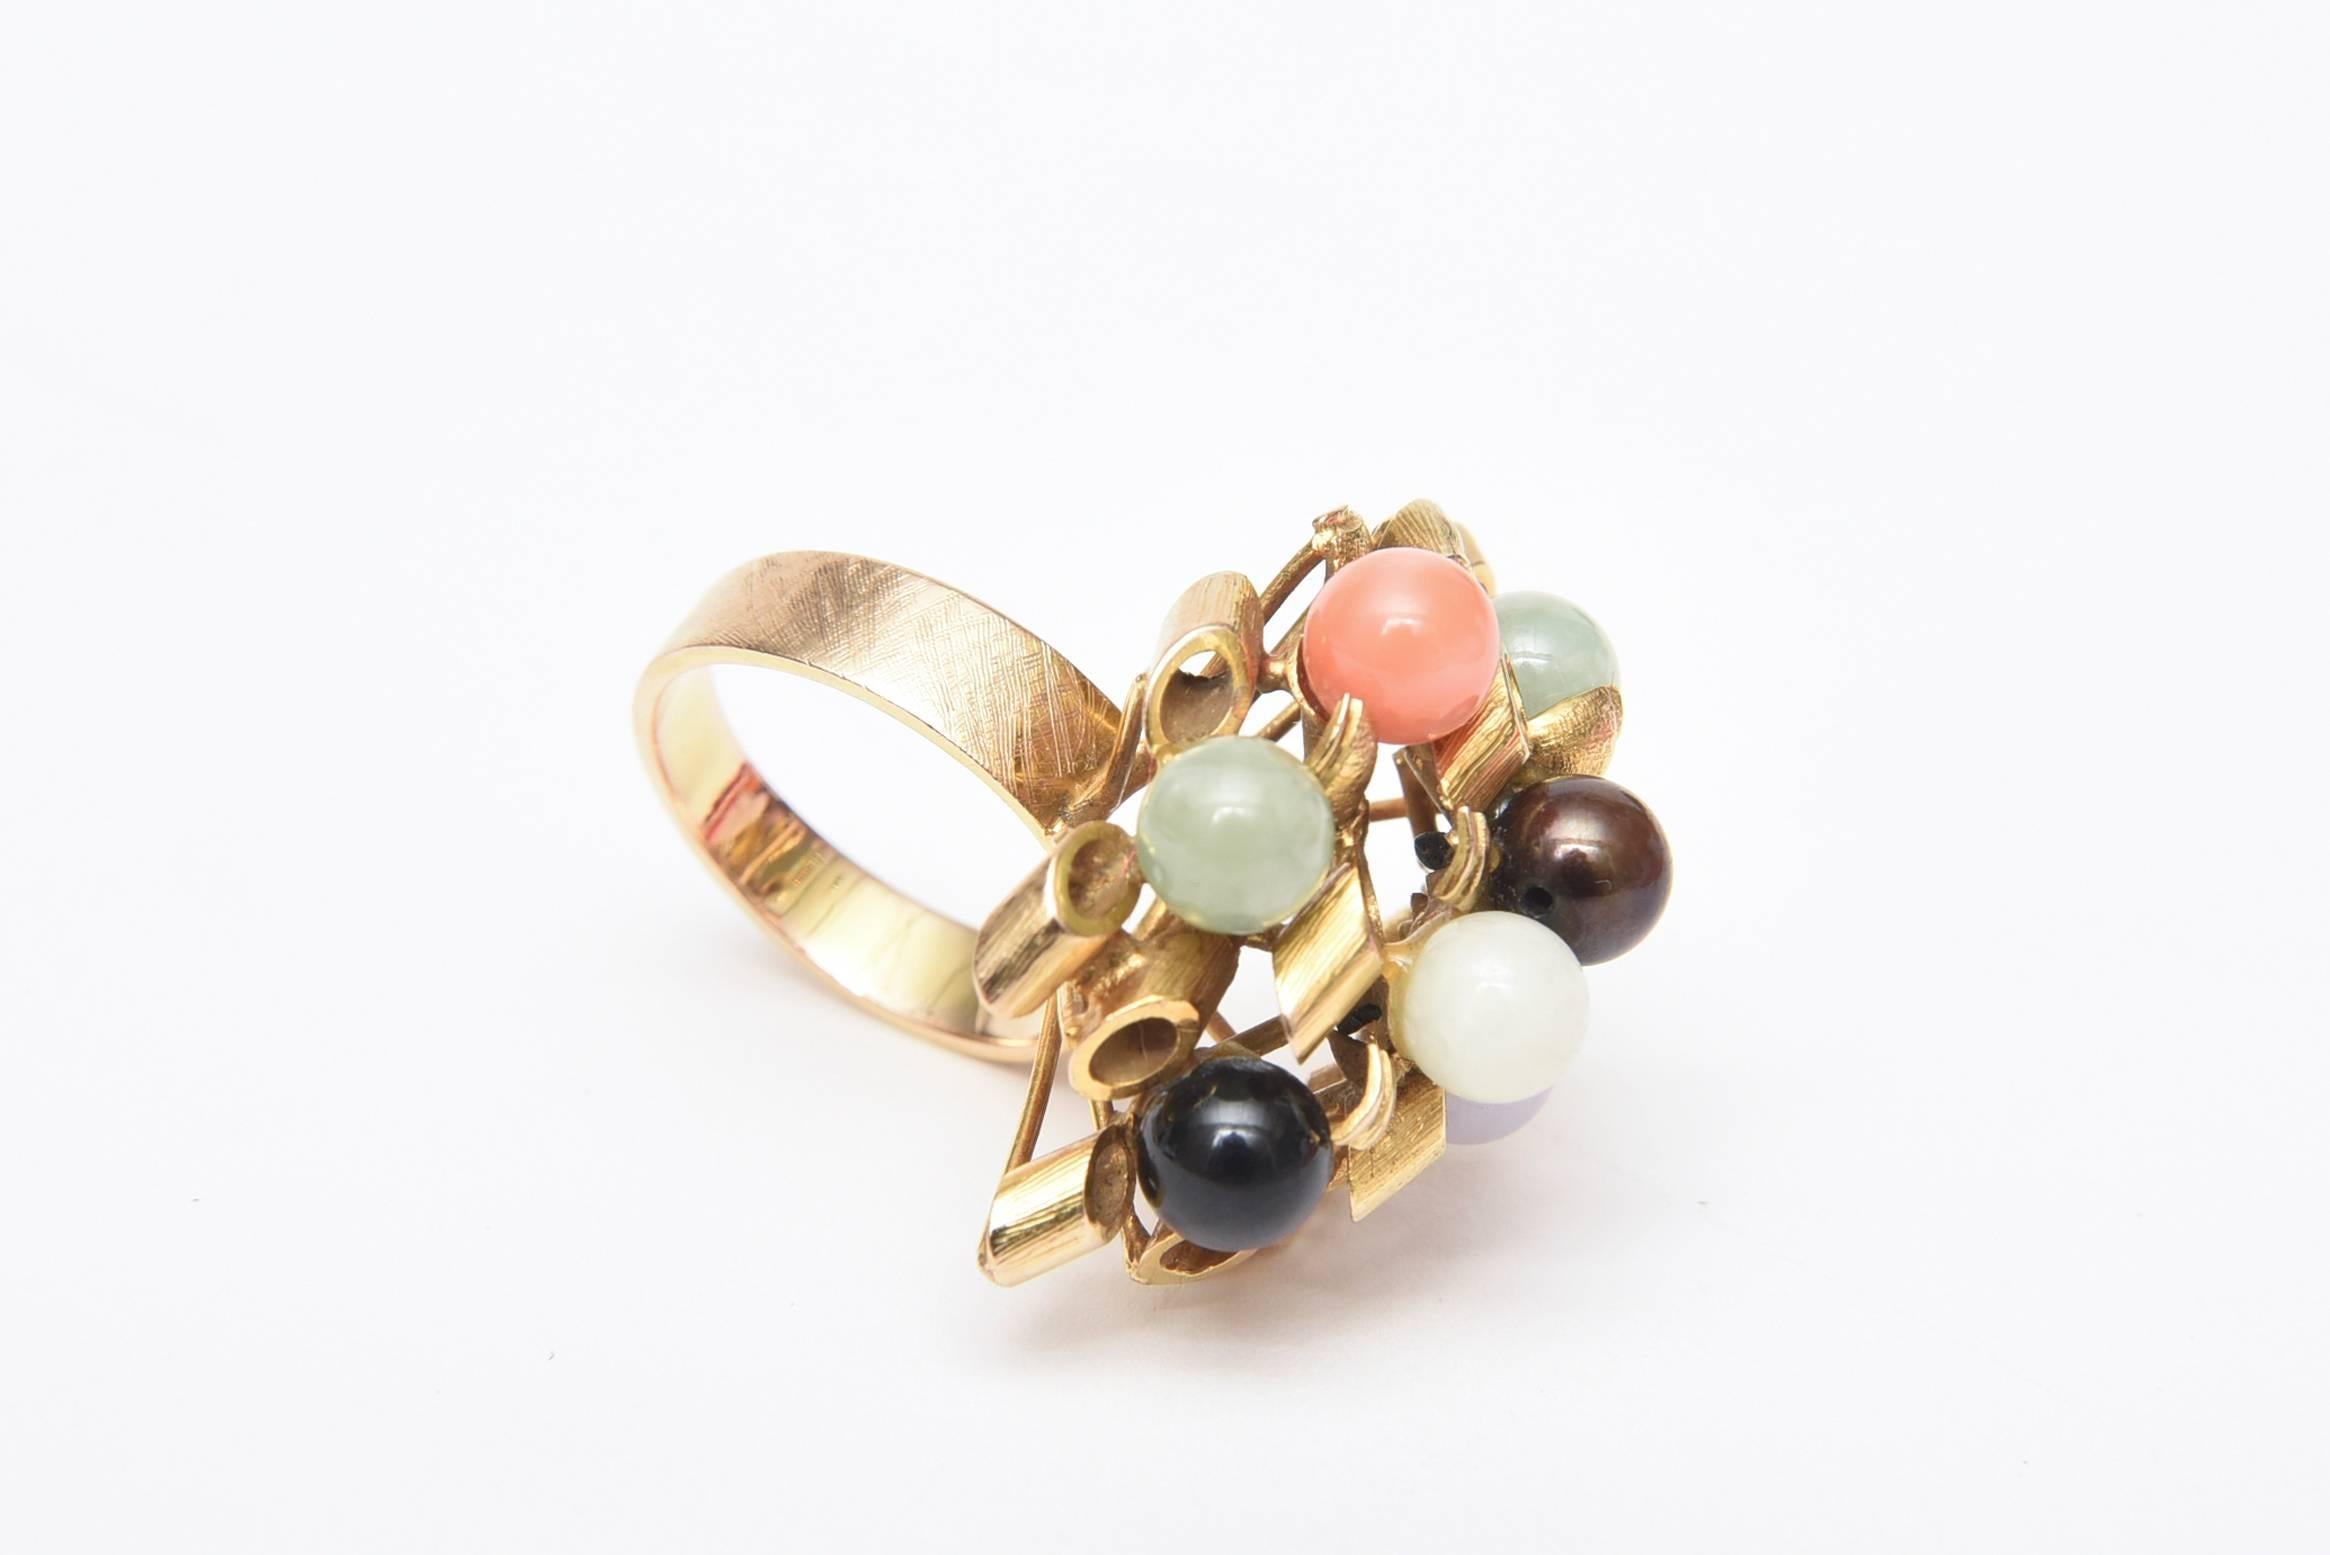 This 1960's vintage cluster sculptural cocktail dome ring has beautiful detail of the 14K yellow gold in spiral forms interspersed with various round stones of jade, coral, amethyst and black and white onyx. It is lovely on the finger as it has a